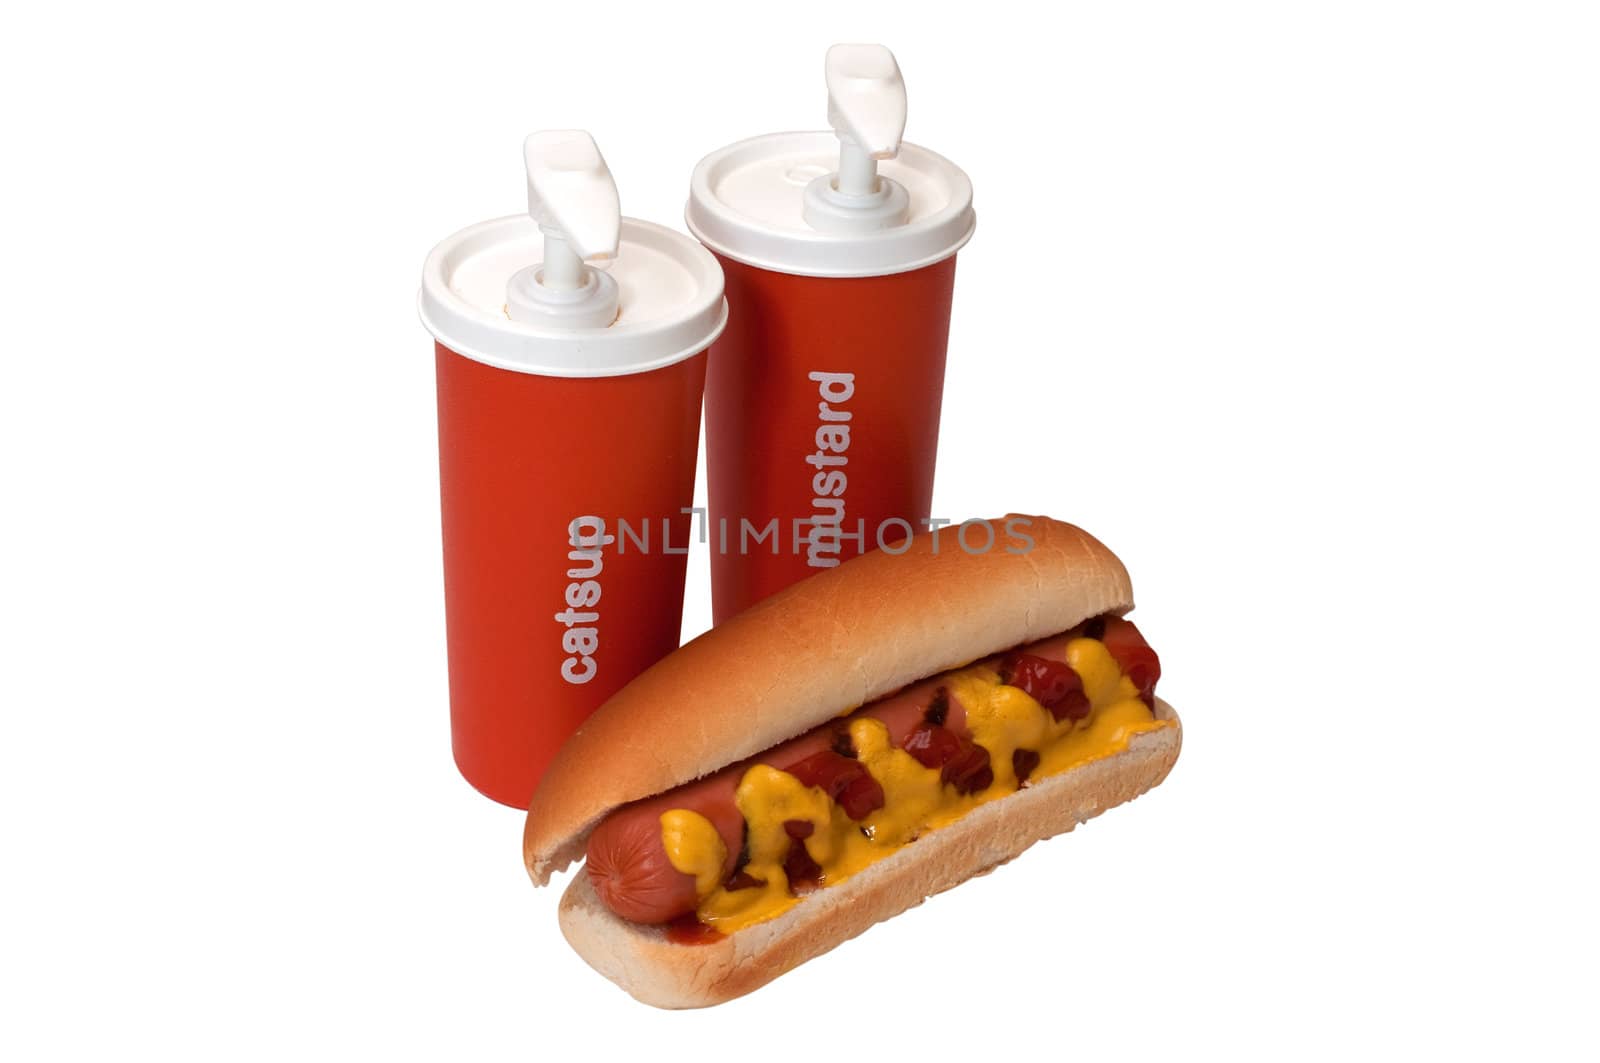 Hot dog with ketchup and mustard and condiment bottles  isolated on white background with clipping path.  